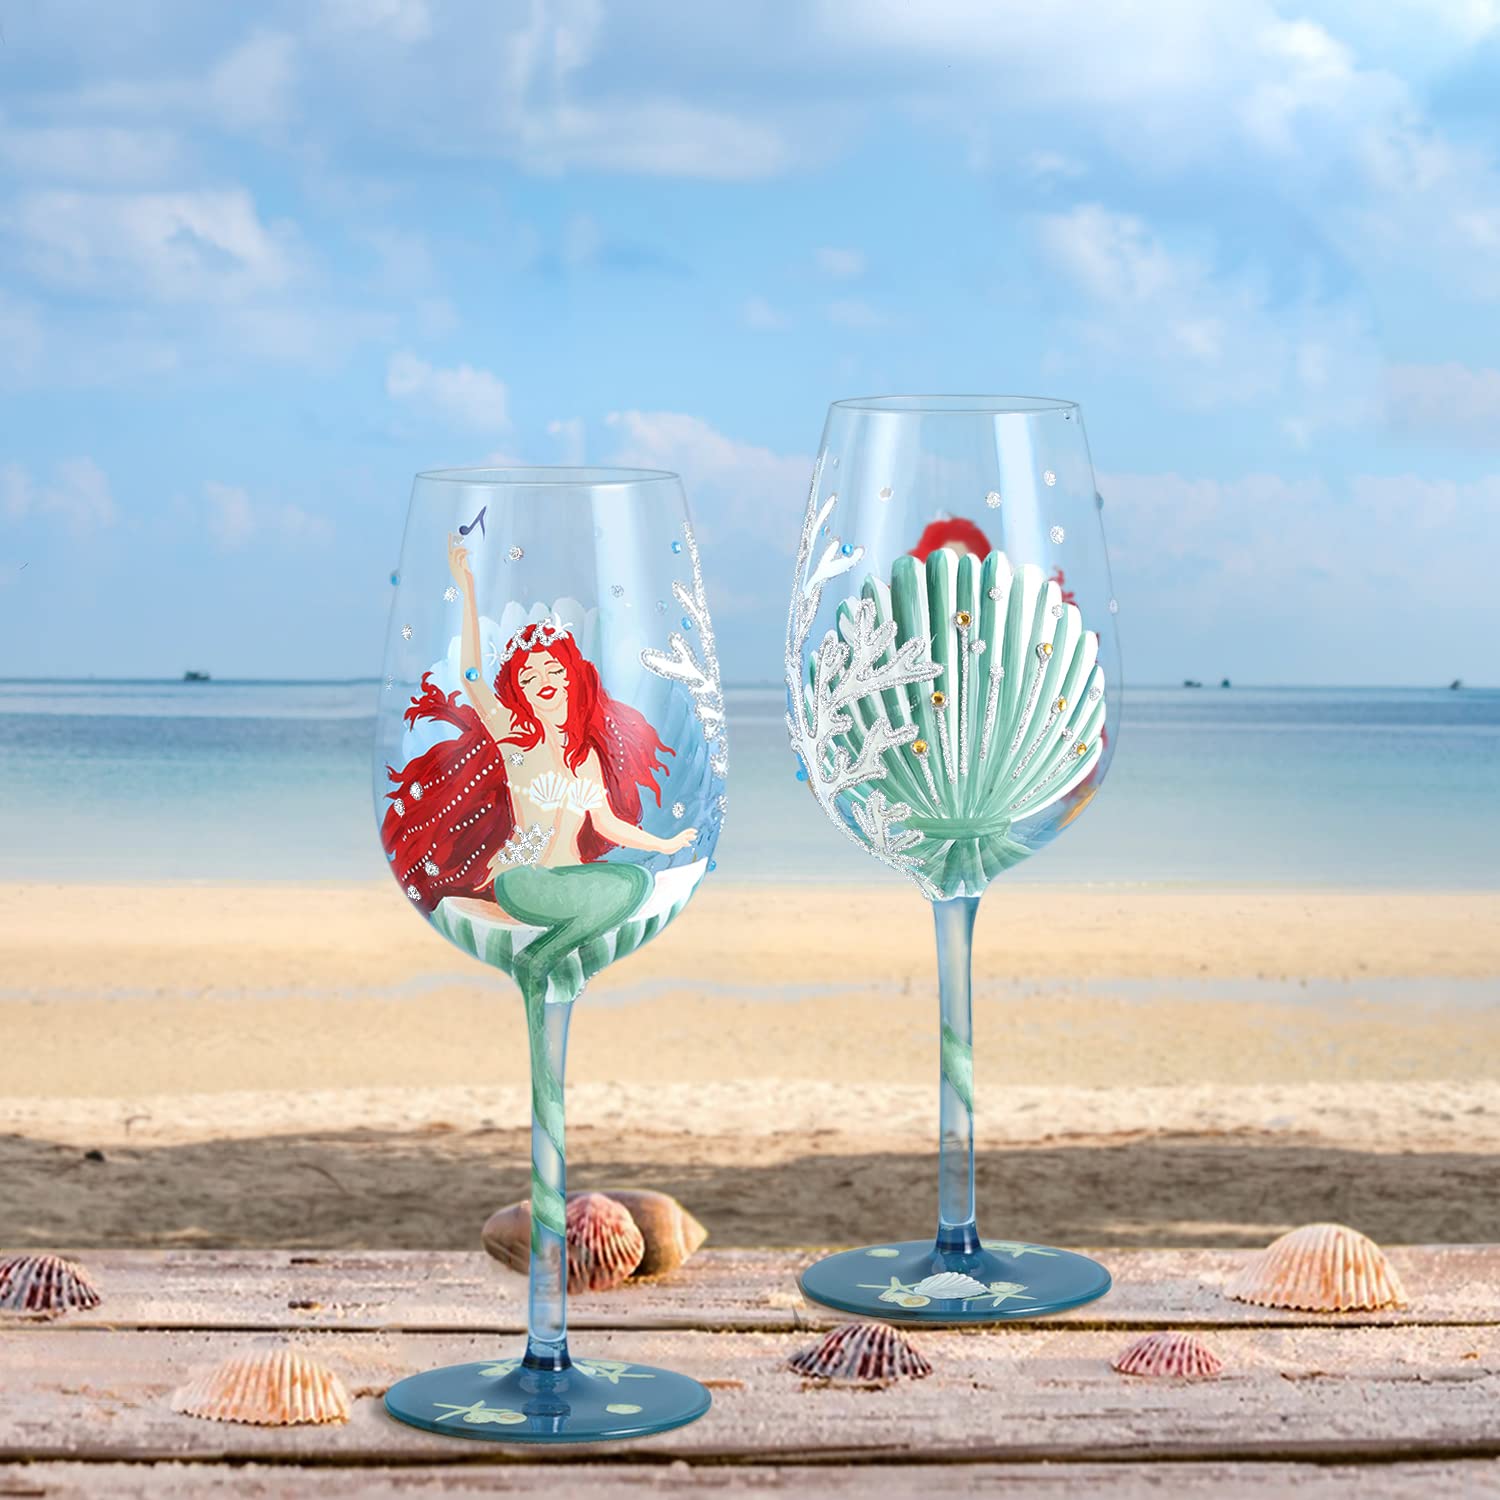 NymphFable Hand Painted The Little Mermaid Wine Glass 15oz Personalised Birthday Gifts for Women Best Friend